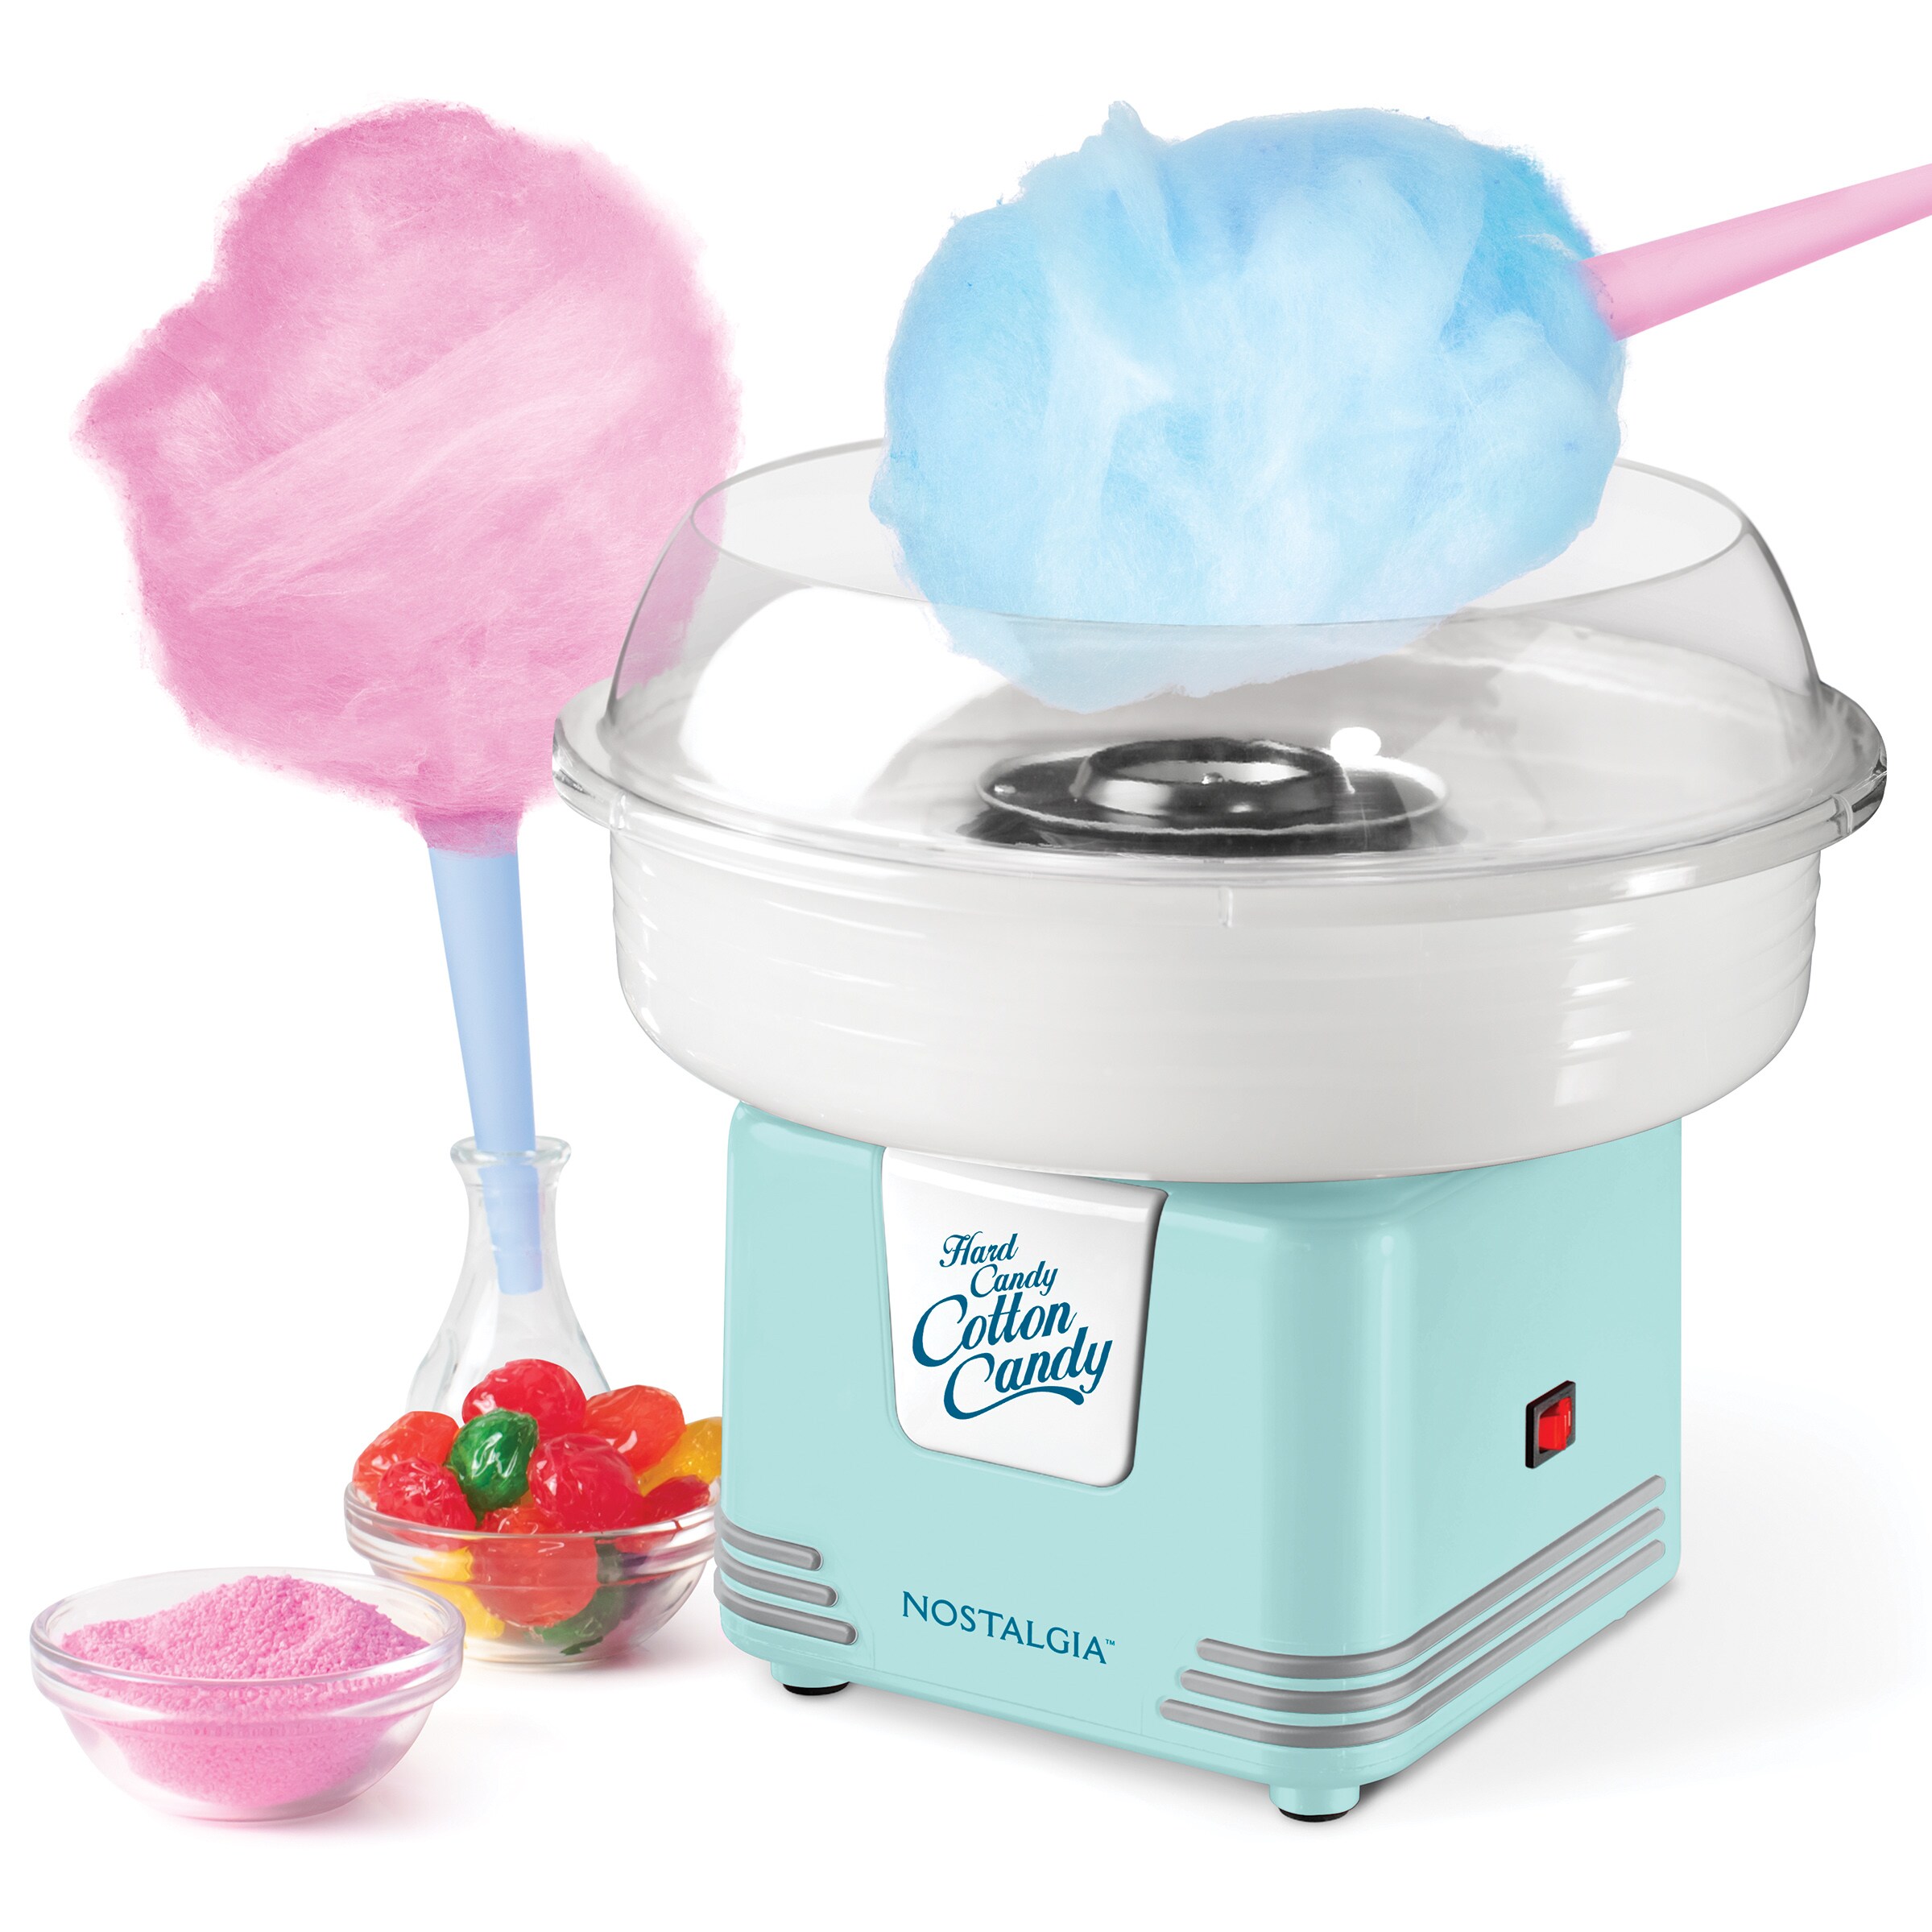 LIANZHIJIE Nostalgia Mini Cotton Candy Machine for Kids 30x30x28 Blue Trolley Electric Cotton Candy Maker Kit with Sugar Spoon and Bamboo Sticks Perfect for Family Party 